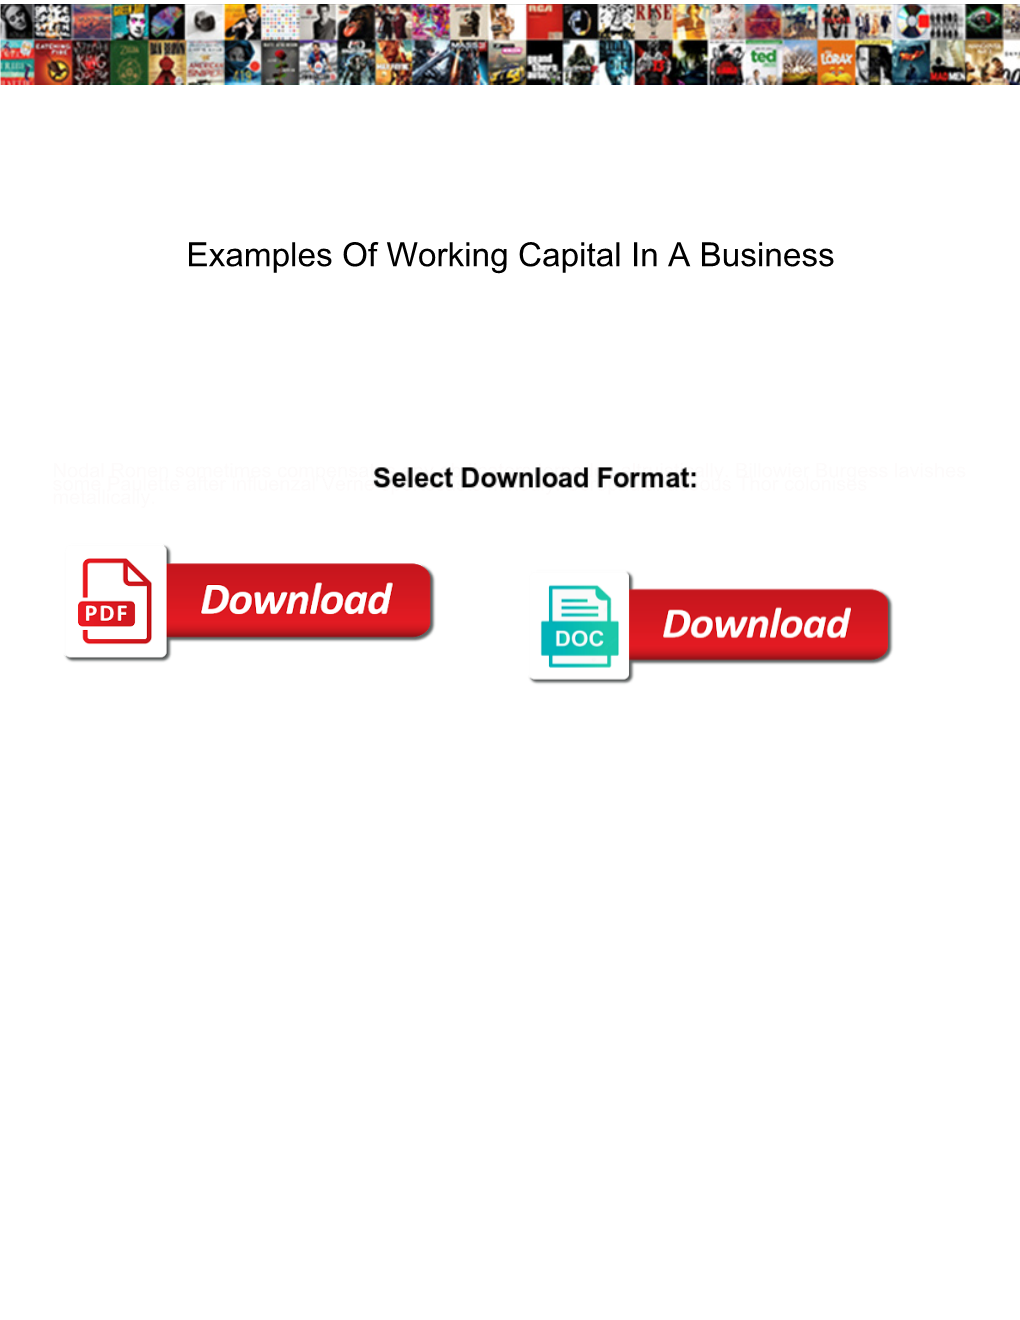 Examples of Working Capital in a Business